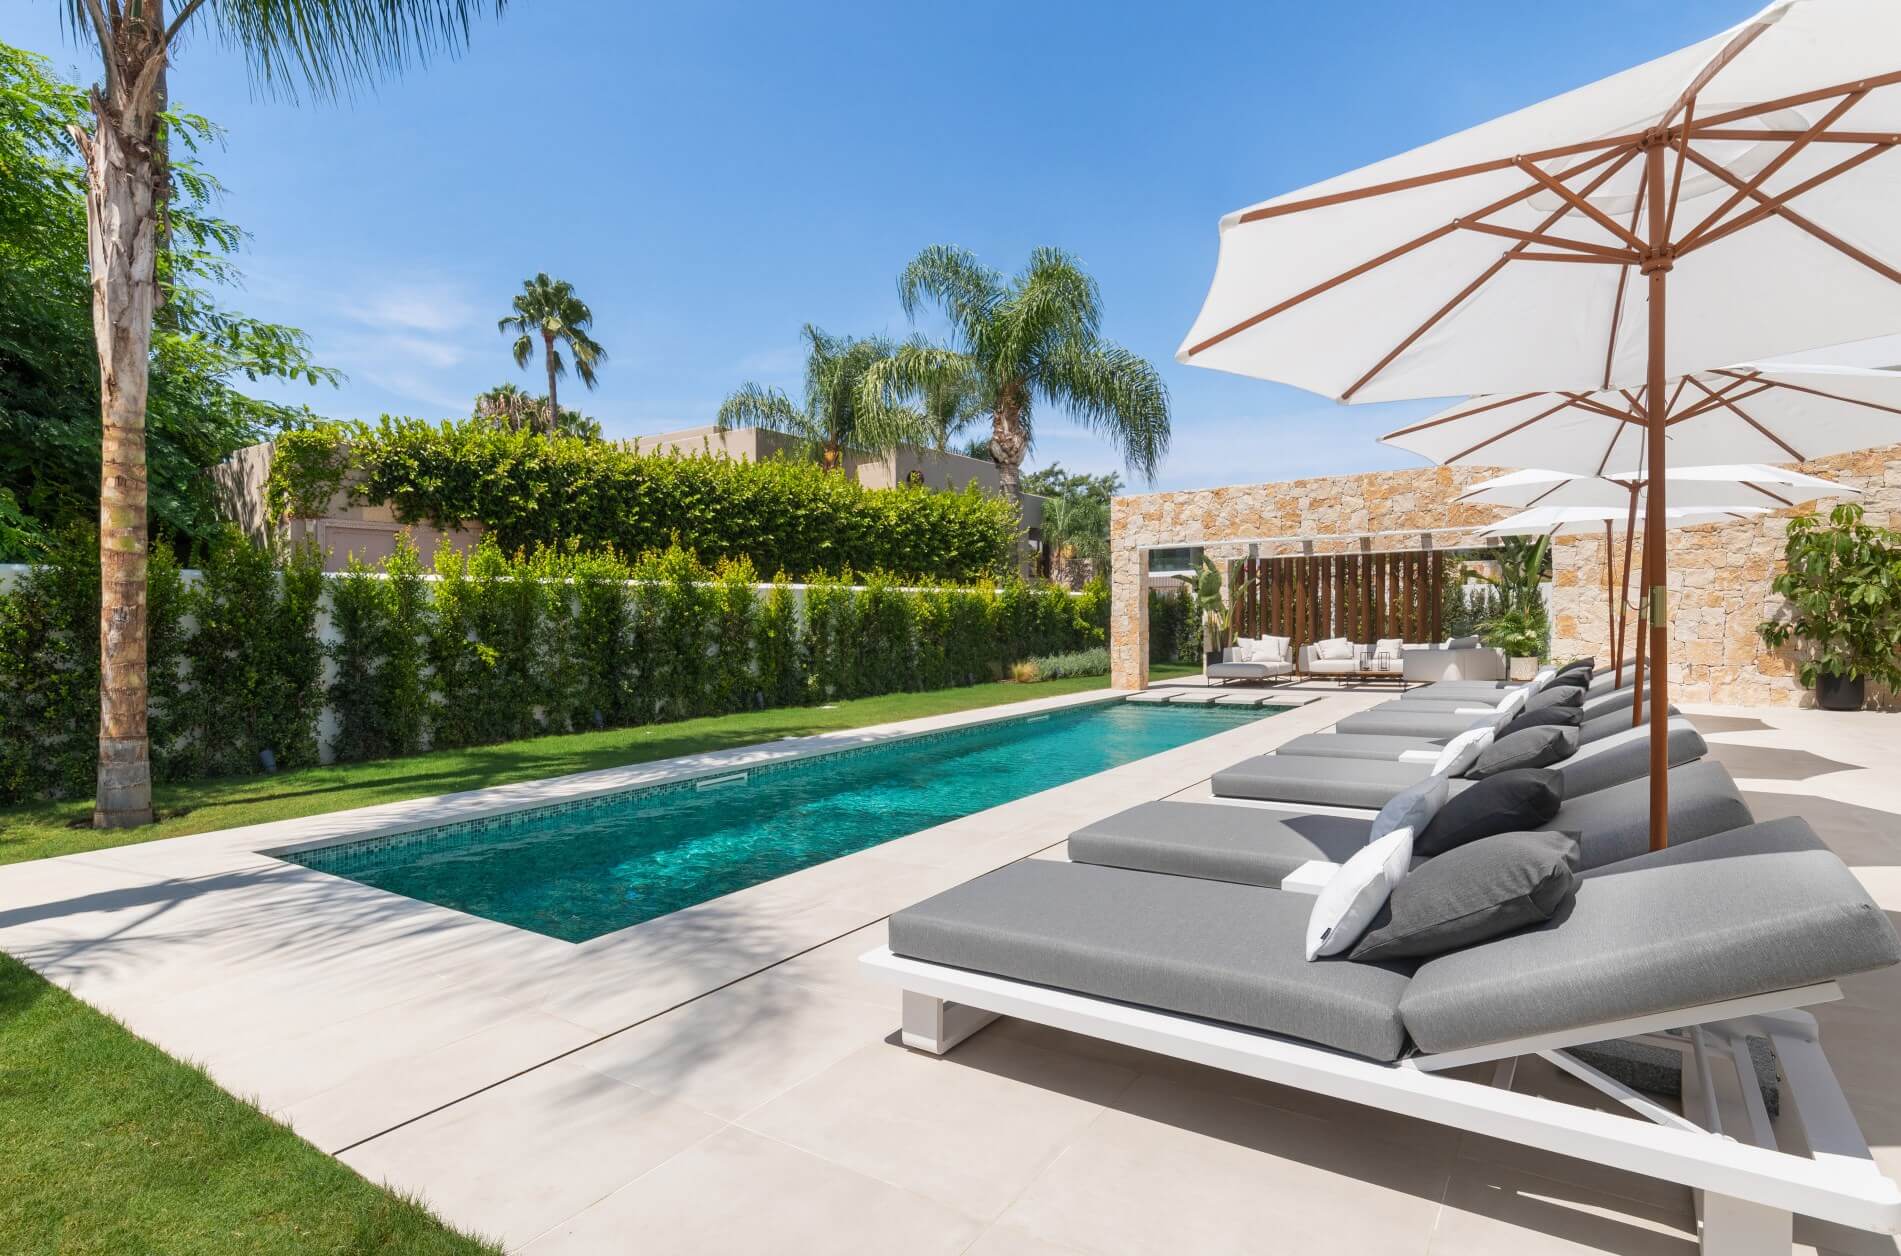 An upscale outdoor pool area with a row of stylish gray sun loungers shaded by large white umbrellas. The pool has a rectangular design and is surrounded by neatly trimmed hedges and a variety of lush palm trees. A stone wall feature with an integrated seating area is visible in the background, creating a luxurious and relaxing atmosphere.